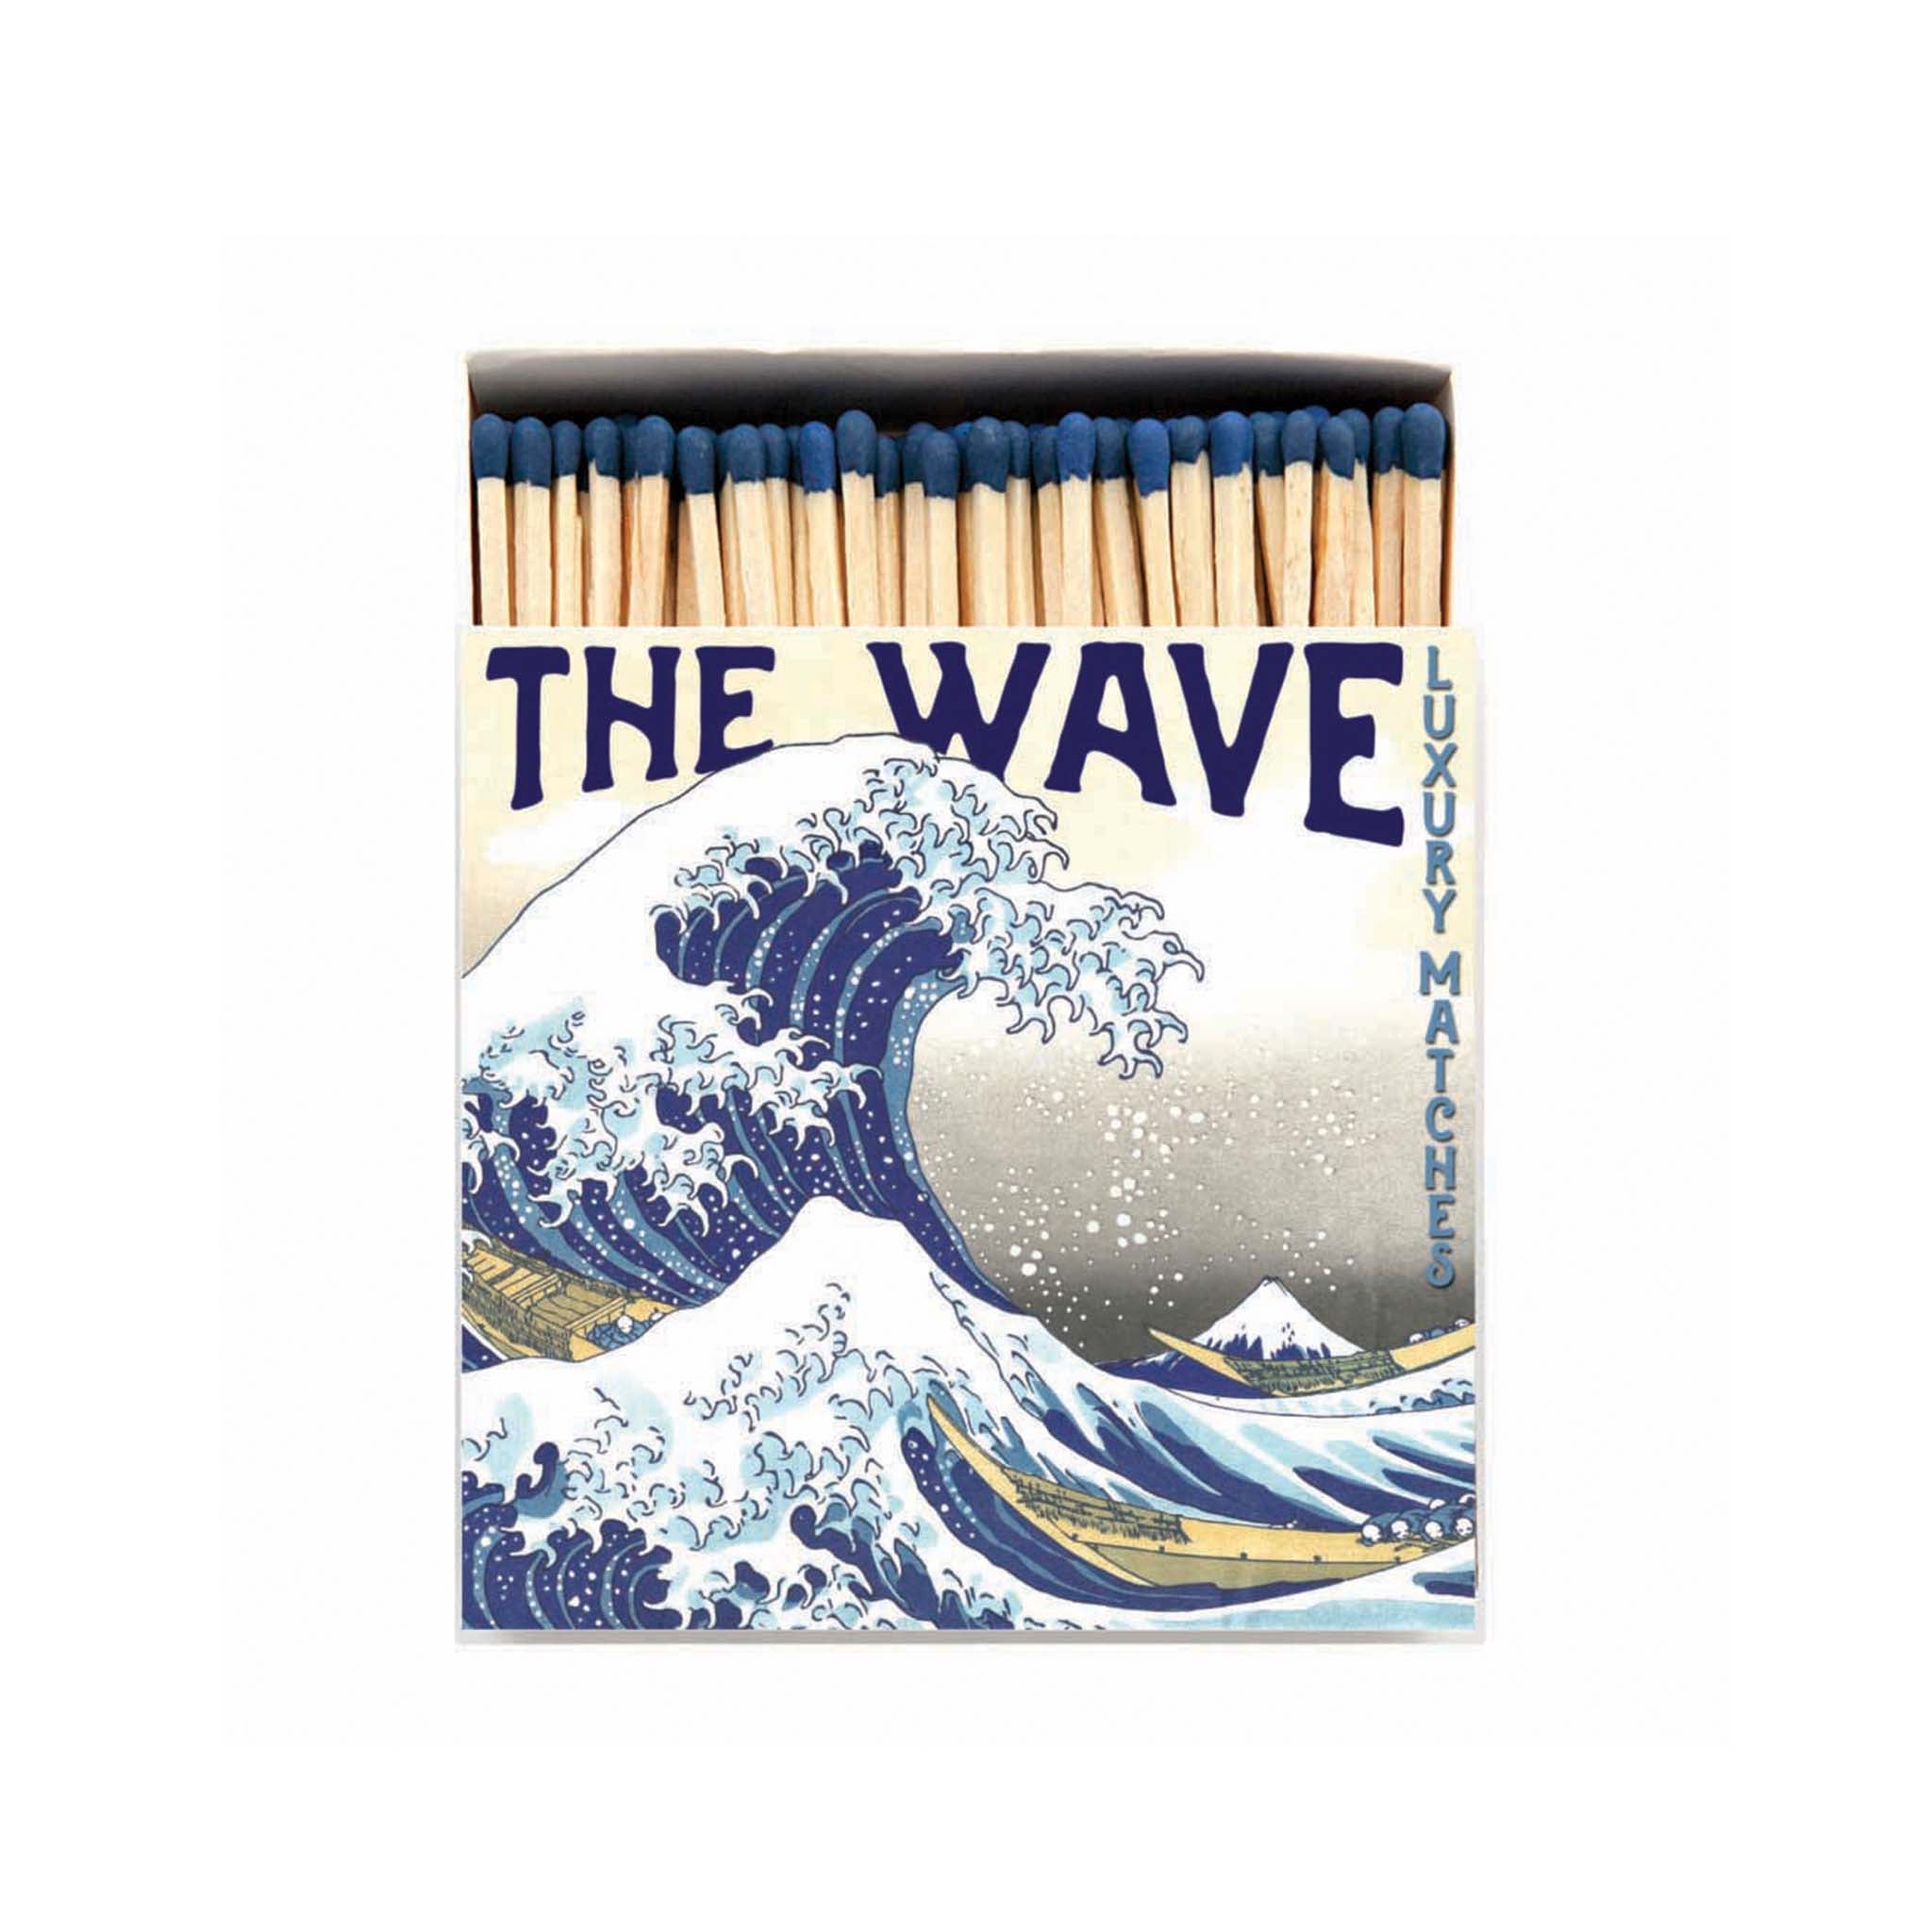 Wave Luxury Safety Matches - Buy online today at Chef UK